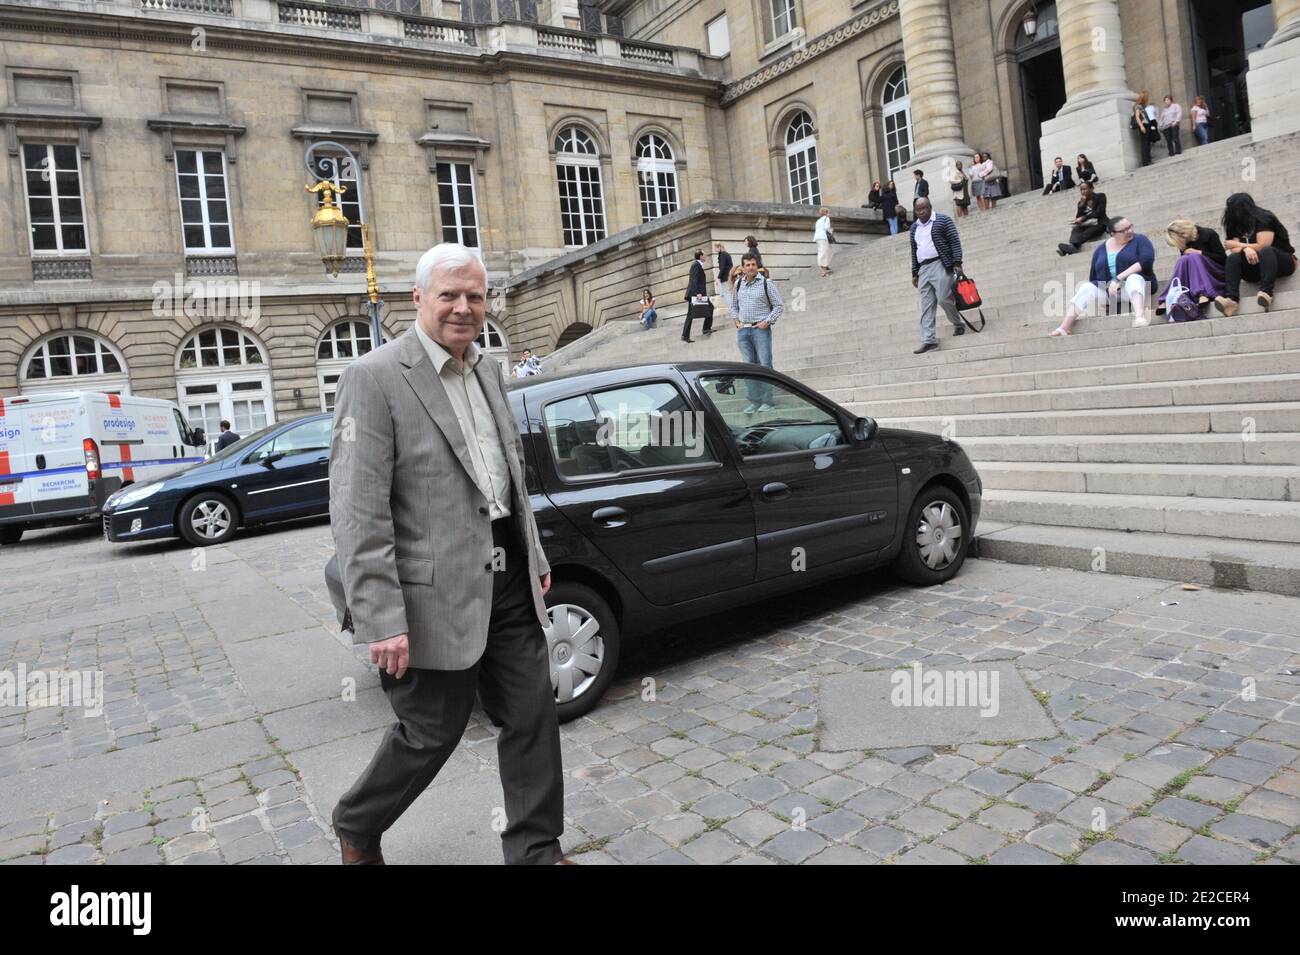 Frenchman Andre Bamberski pictured at the Palais de Justice for German cardiologist Dieter Krombach's trial for the murder of Kalinka Bamberski, in Paris, France on October 4, 2011. The French court today decided to continue the trial of the German doctor, who is accused of having raped and killed his then 14-year-old stepdaughter, Kalinka Bamberski, in the summer of 1982 while she was holidaying with her mother at Krombach's home at Lake Constance, southern Germany. A court in Germany ruled that Krombach could not be held responsible for the death, but in 1995 a court in Paris found the docto Stock Photo